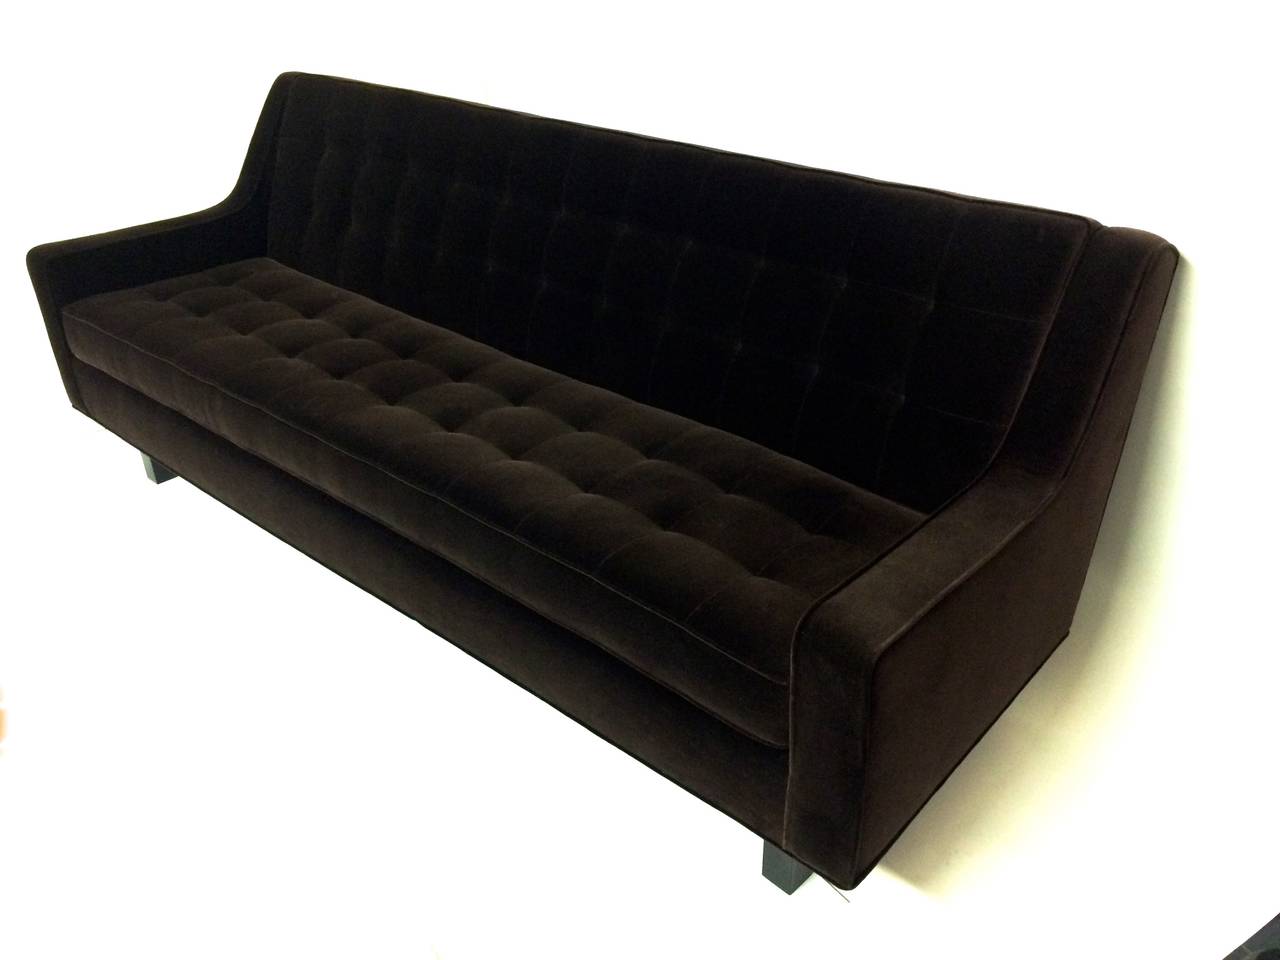 1950s Edward Wormley inspired sofa reupholstered; tufted in chocolate brown velvet.
Sits on four black, cubed wooden legs.